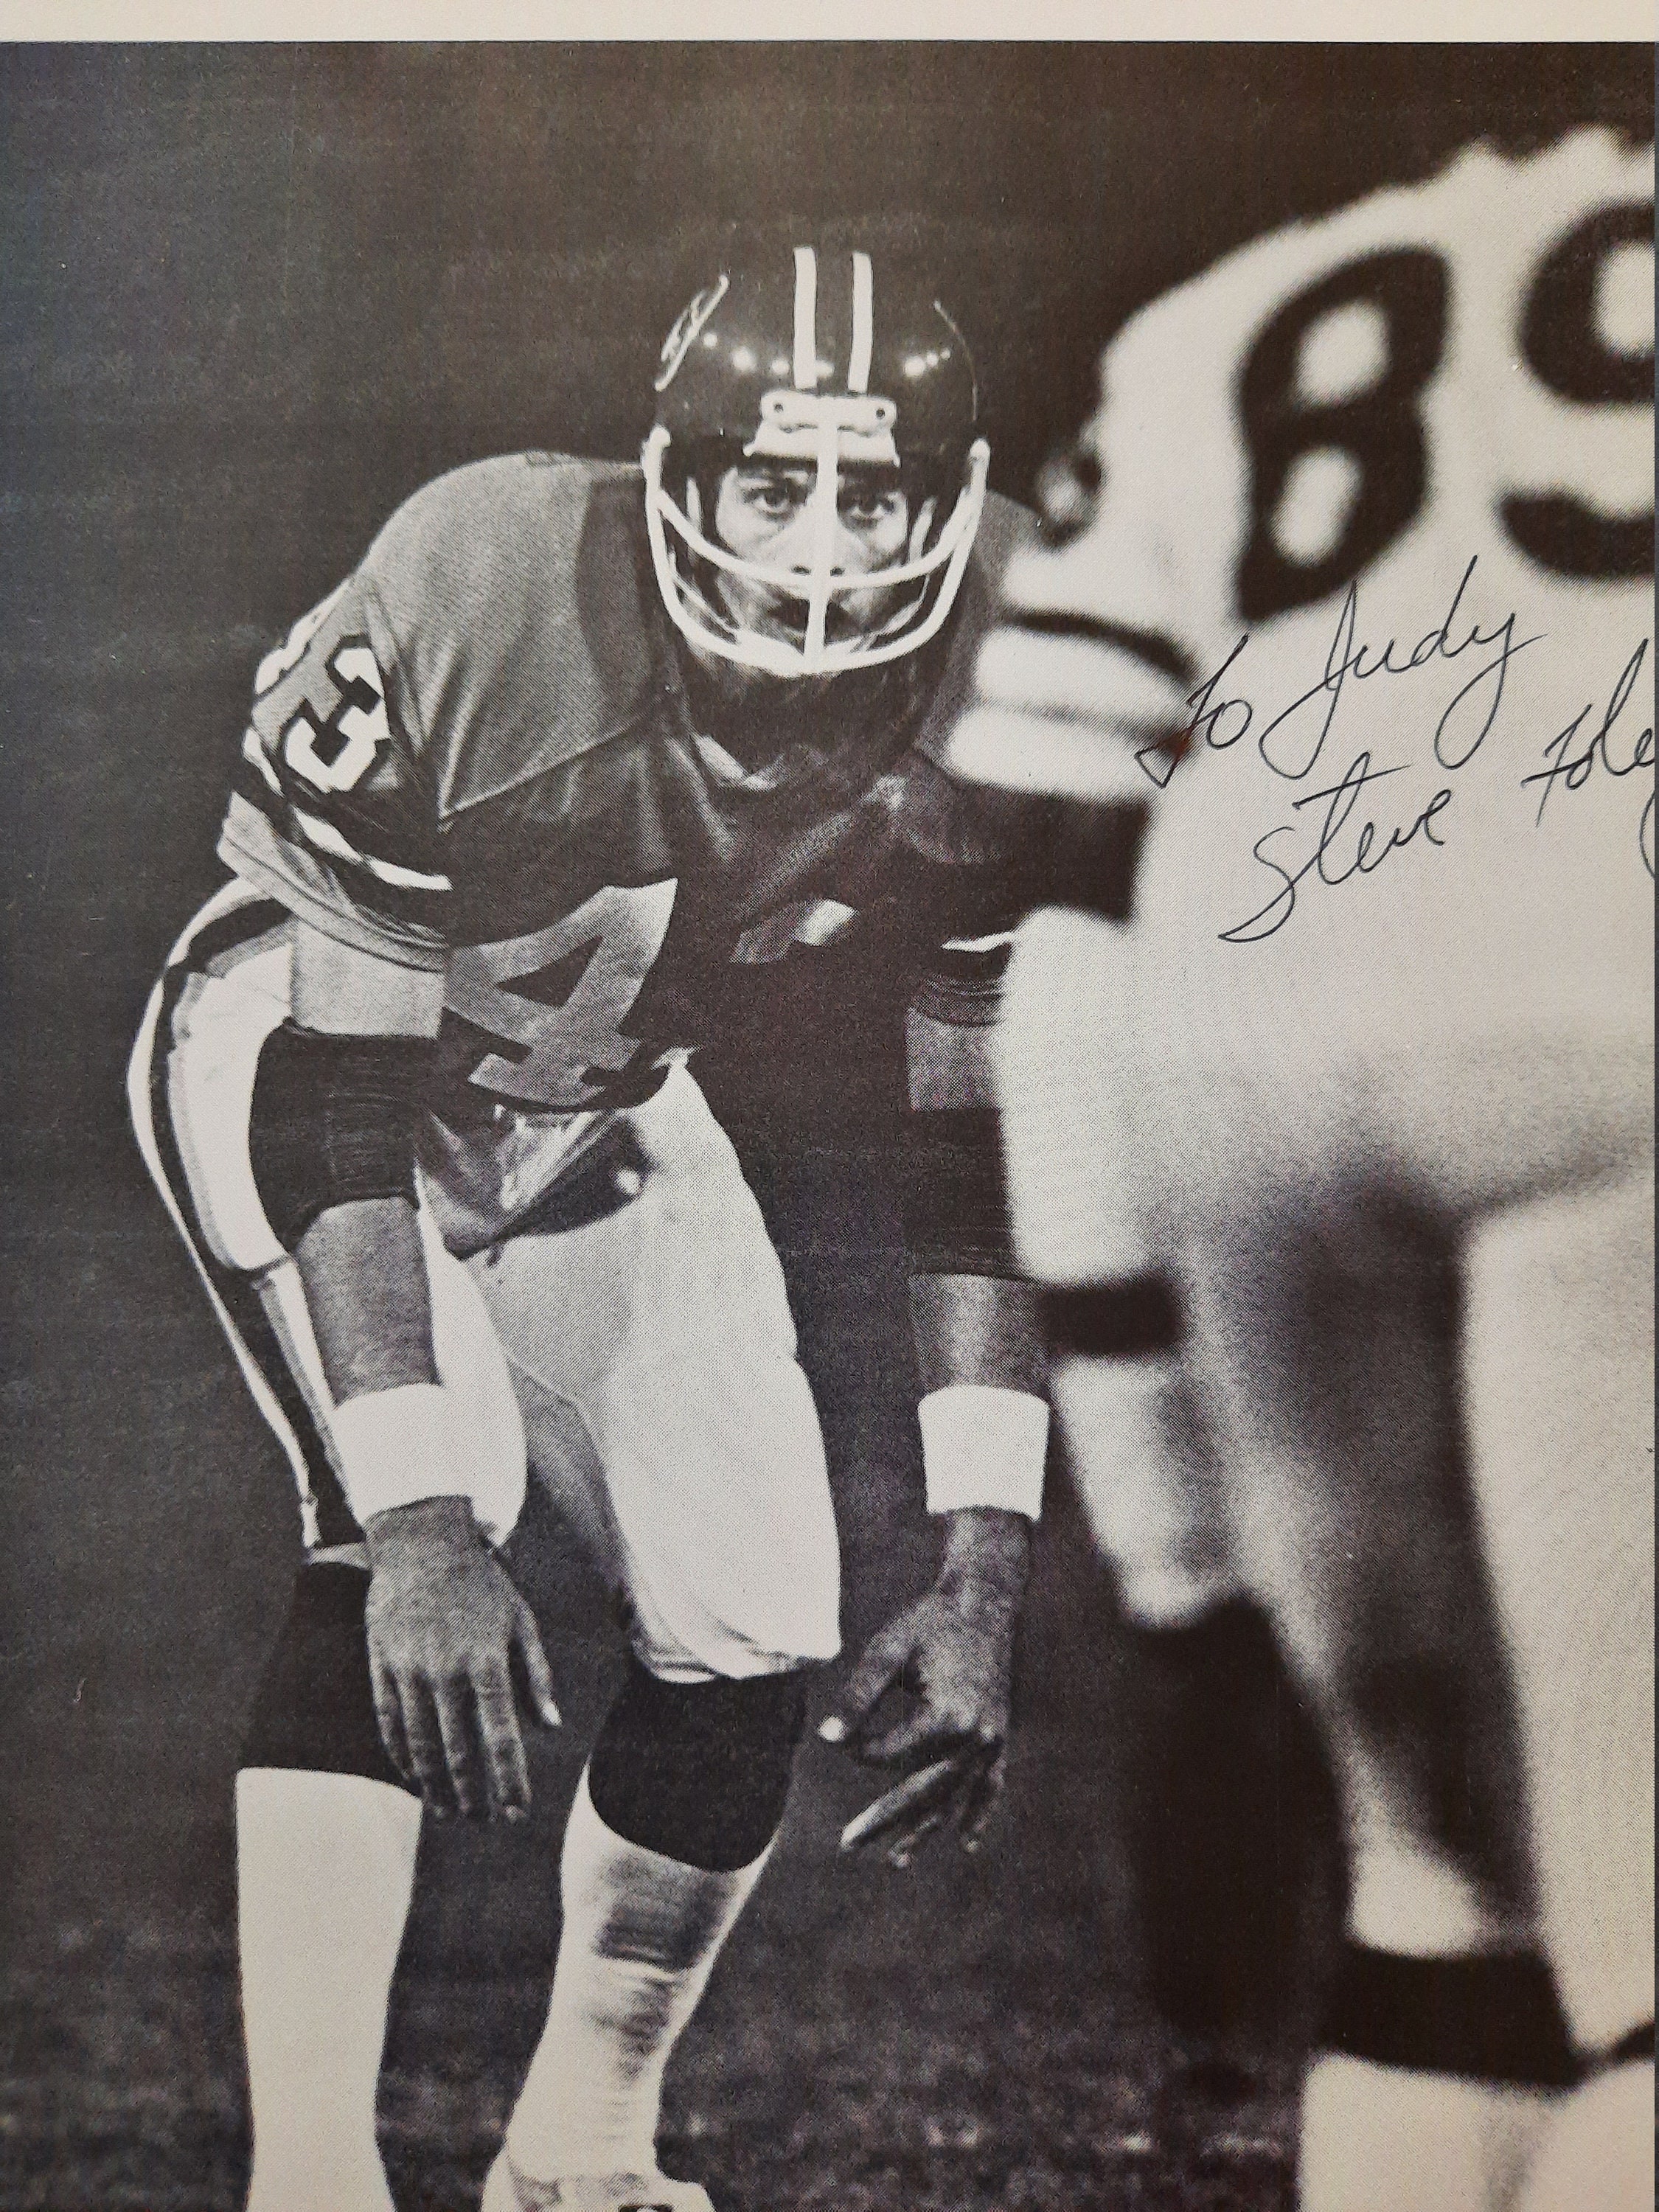 Vintage Autographed Steve Foley Photo from the early 1980's